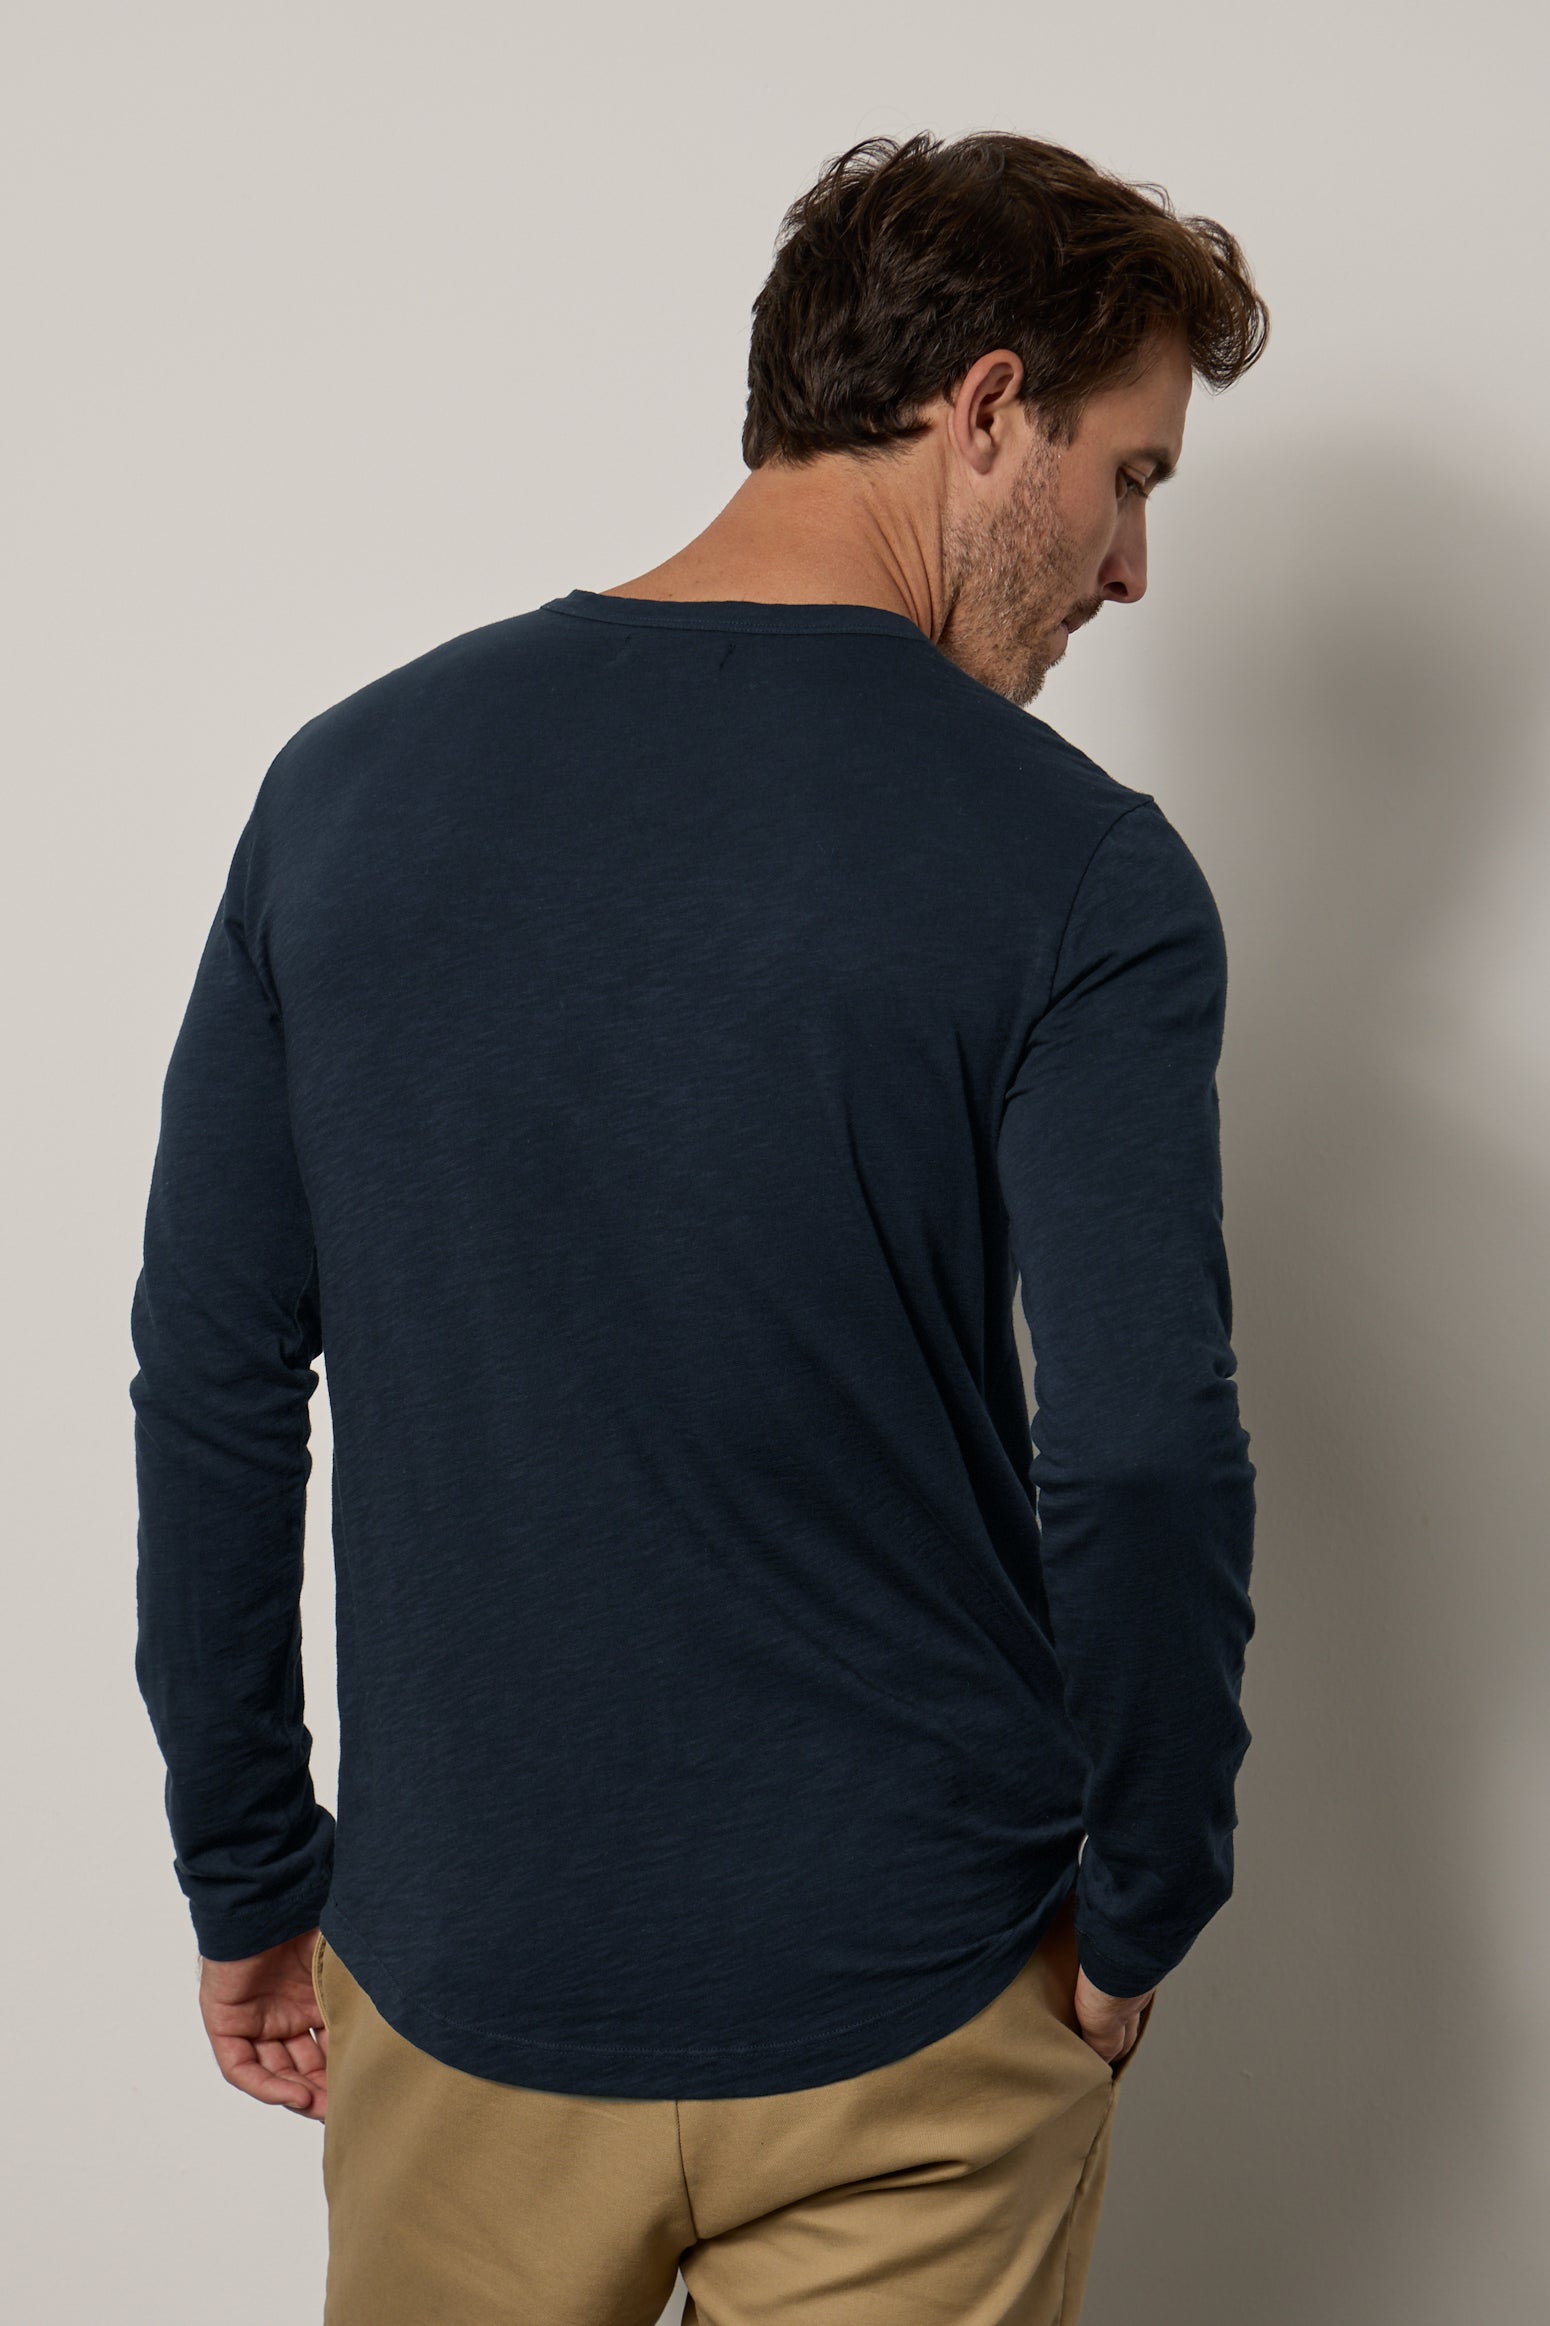   The back view of a man wearing a Velvet by Graham & Spencer KAI CREW NECK TEE showcases the subtle curve and flawless fit of the true slub knit fabric. 